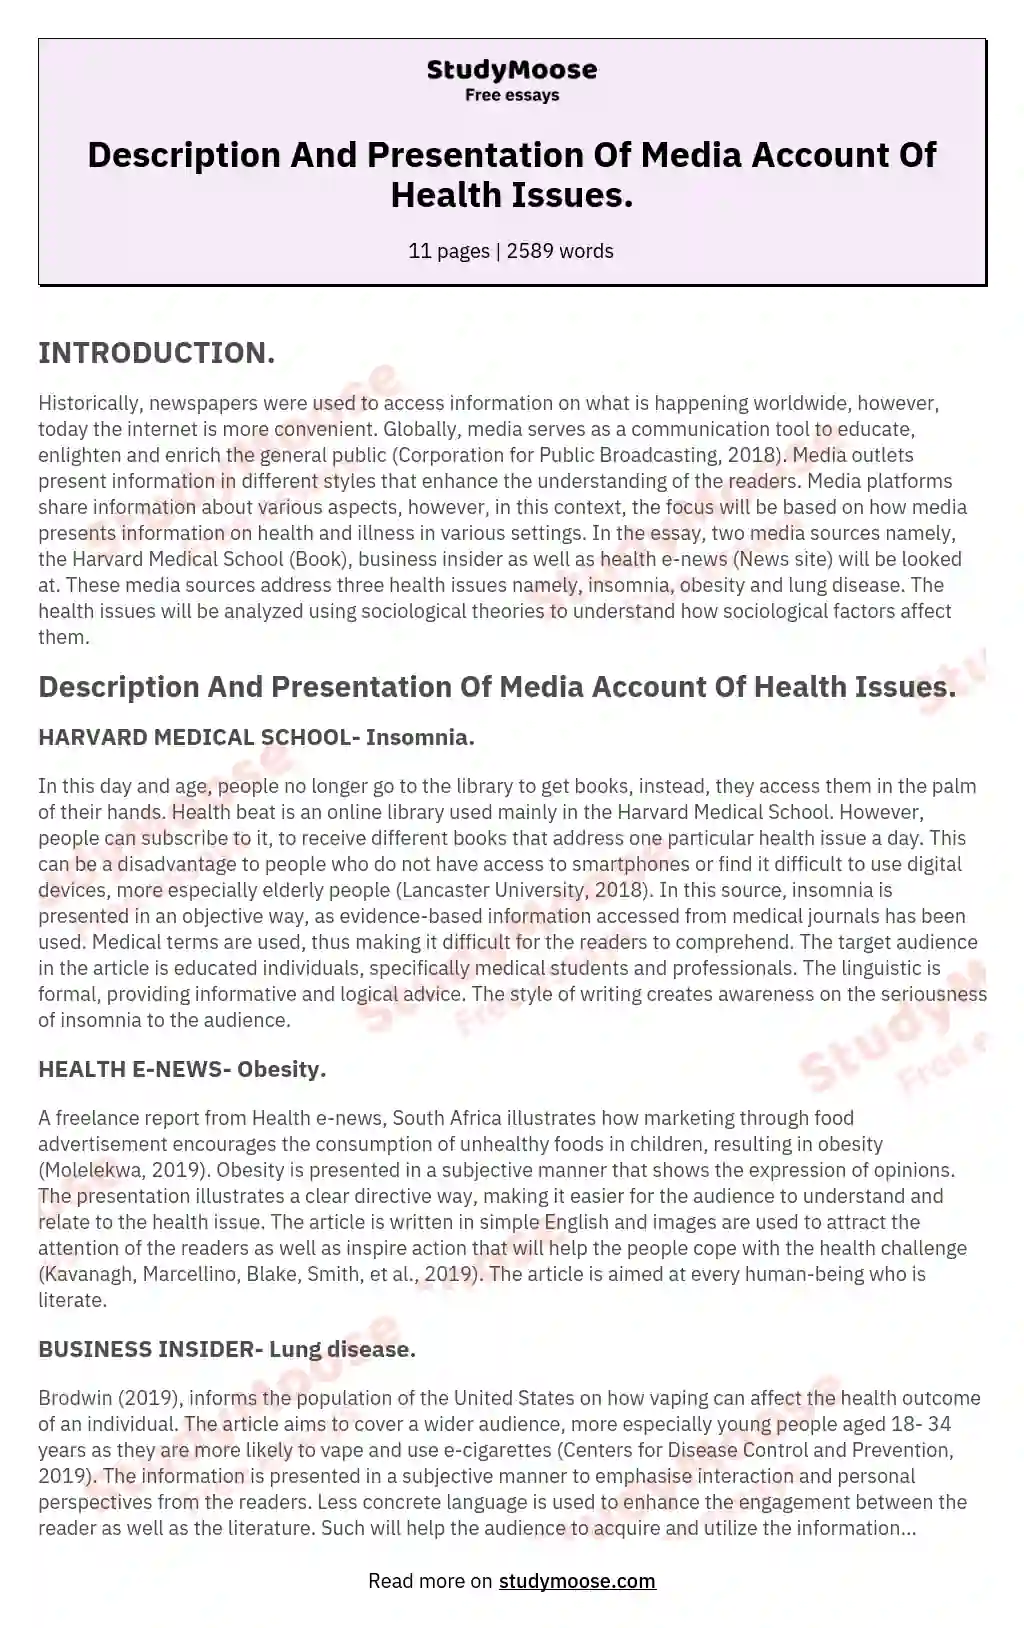 Description And Presentation Of Media Account Of Health Issues.